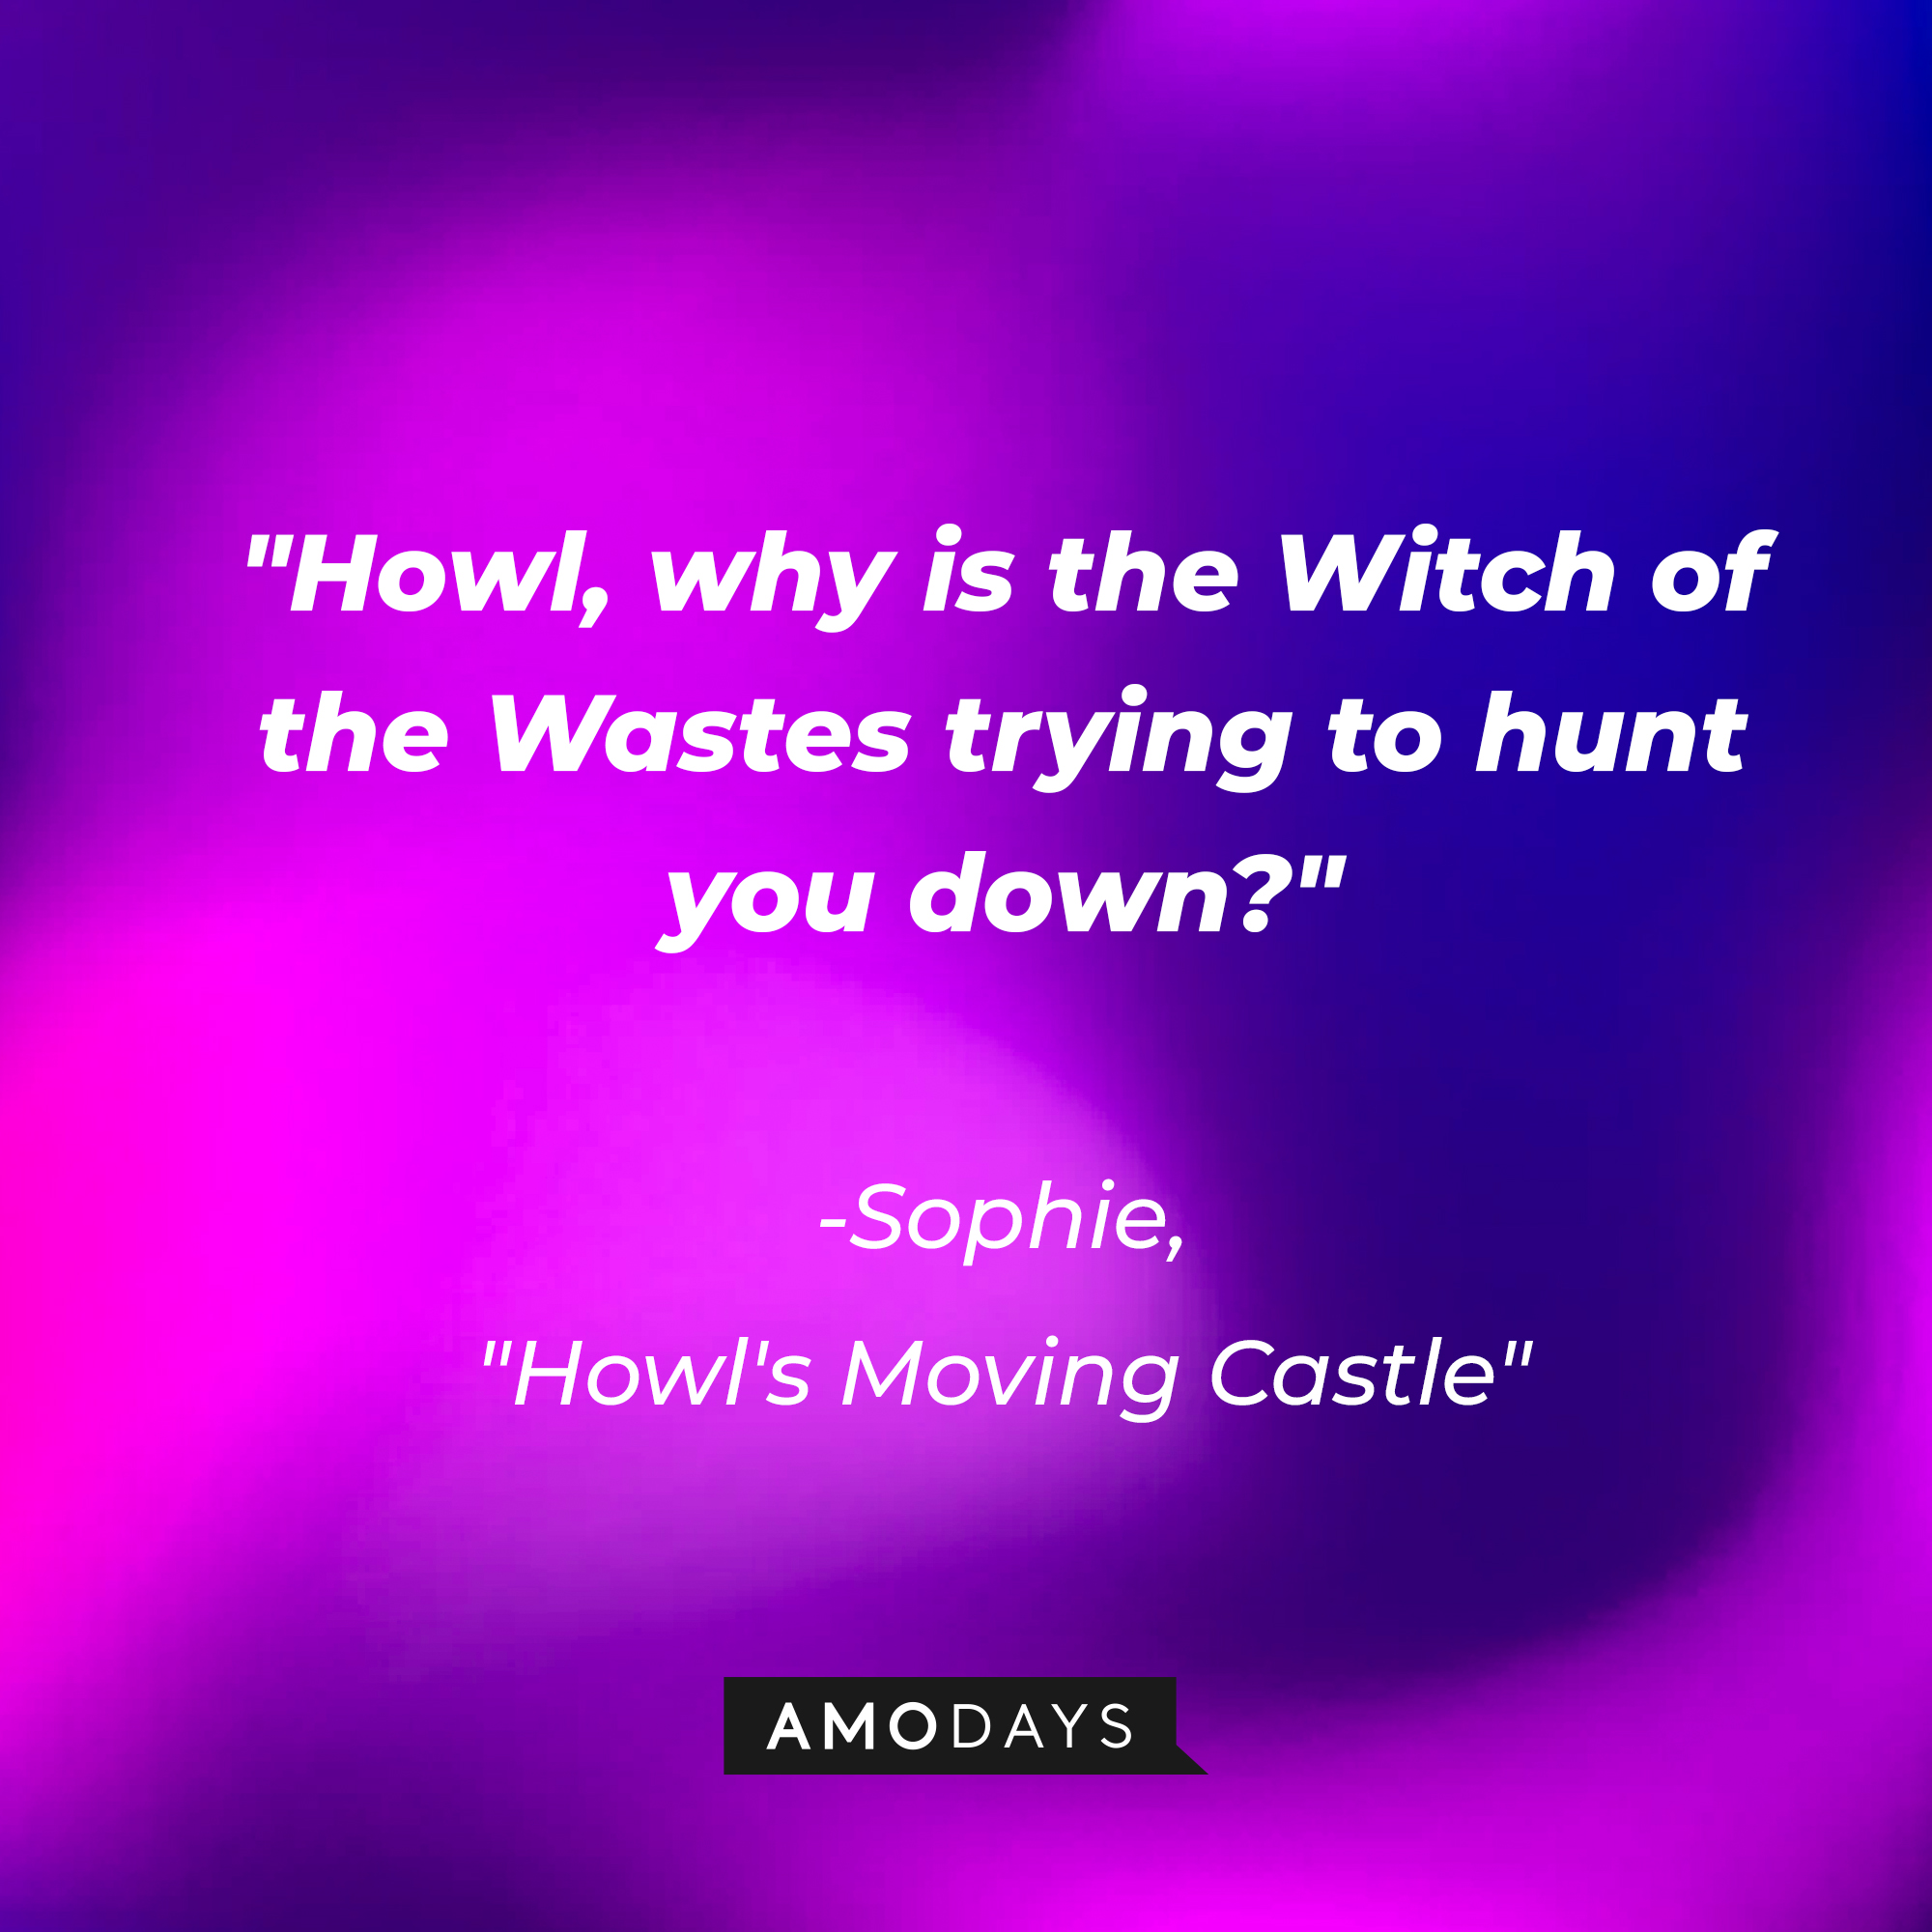 Sophie's quote in "Howl's Moving Castle:" "Howl, why is the Witch of the Wastes trying to hunt you down?" | Source: AmoDays